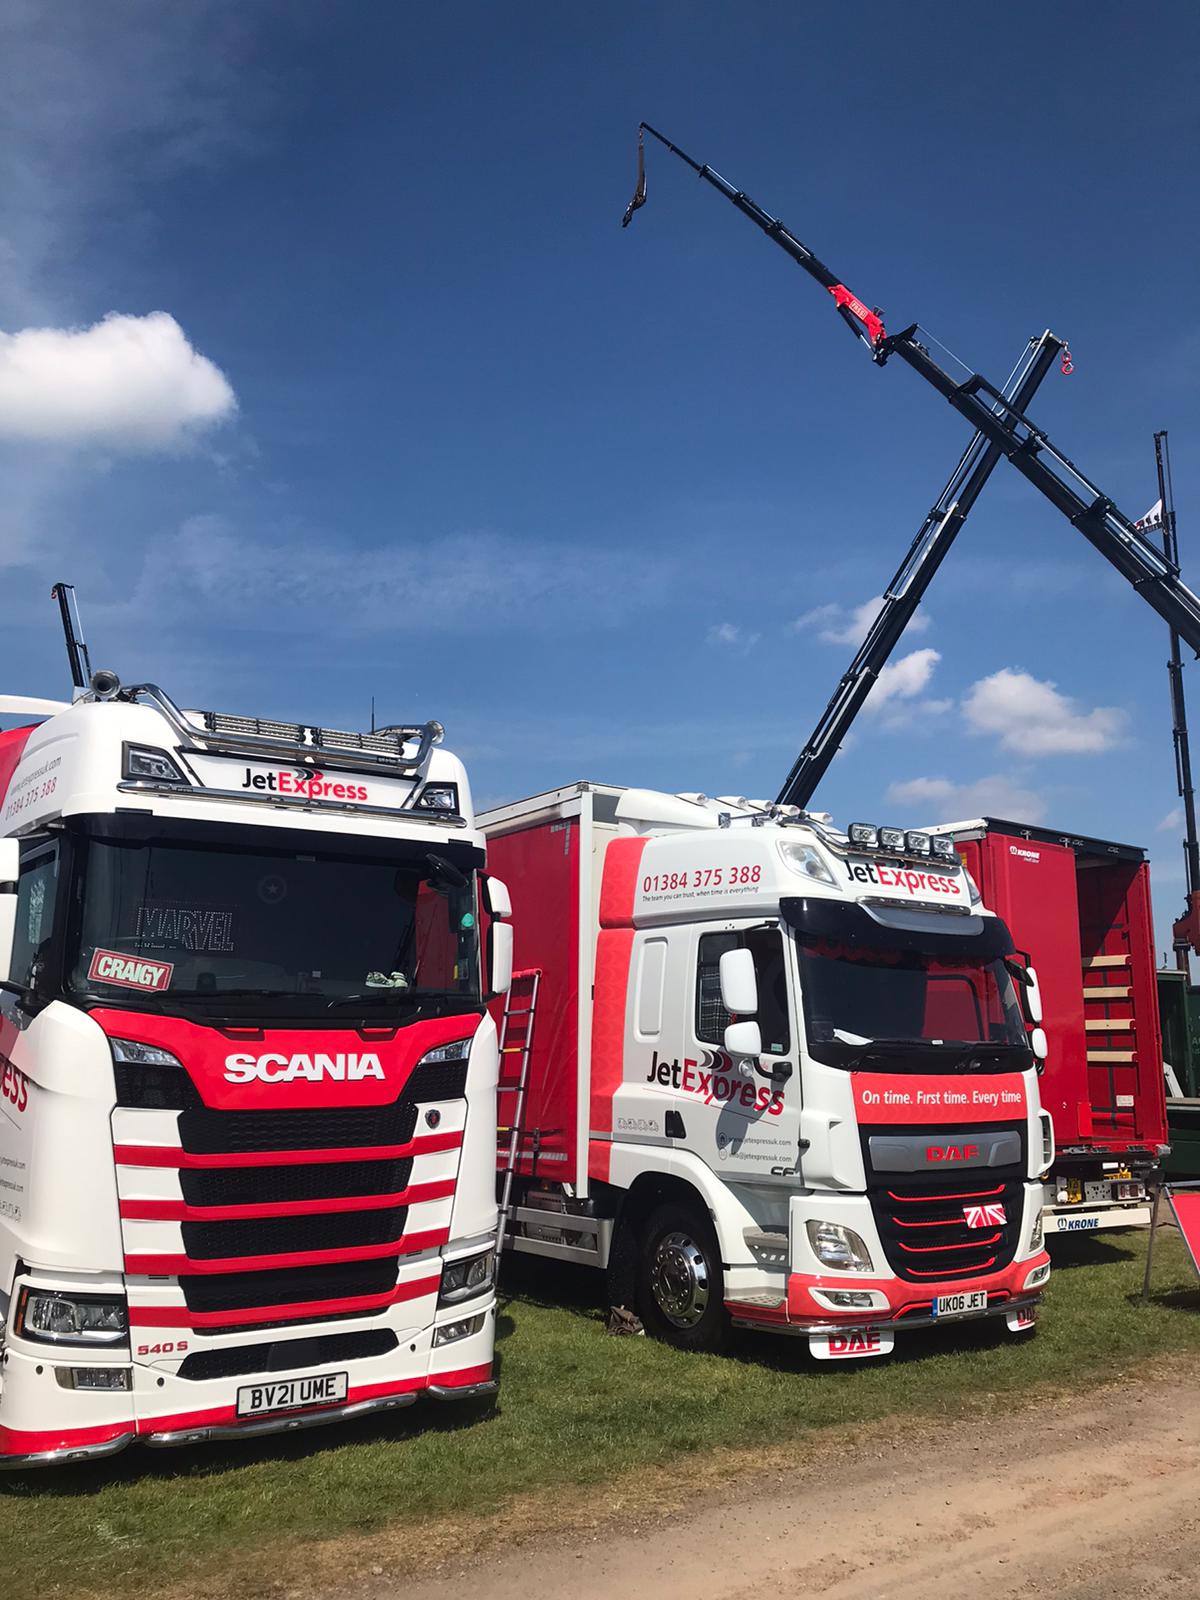 Jet Express Trucks Highly Commended at Truckfest 2022